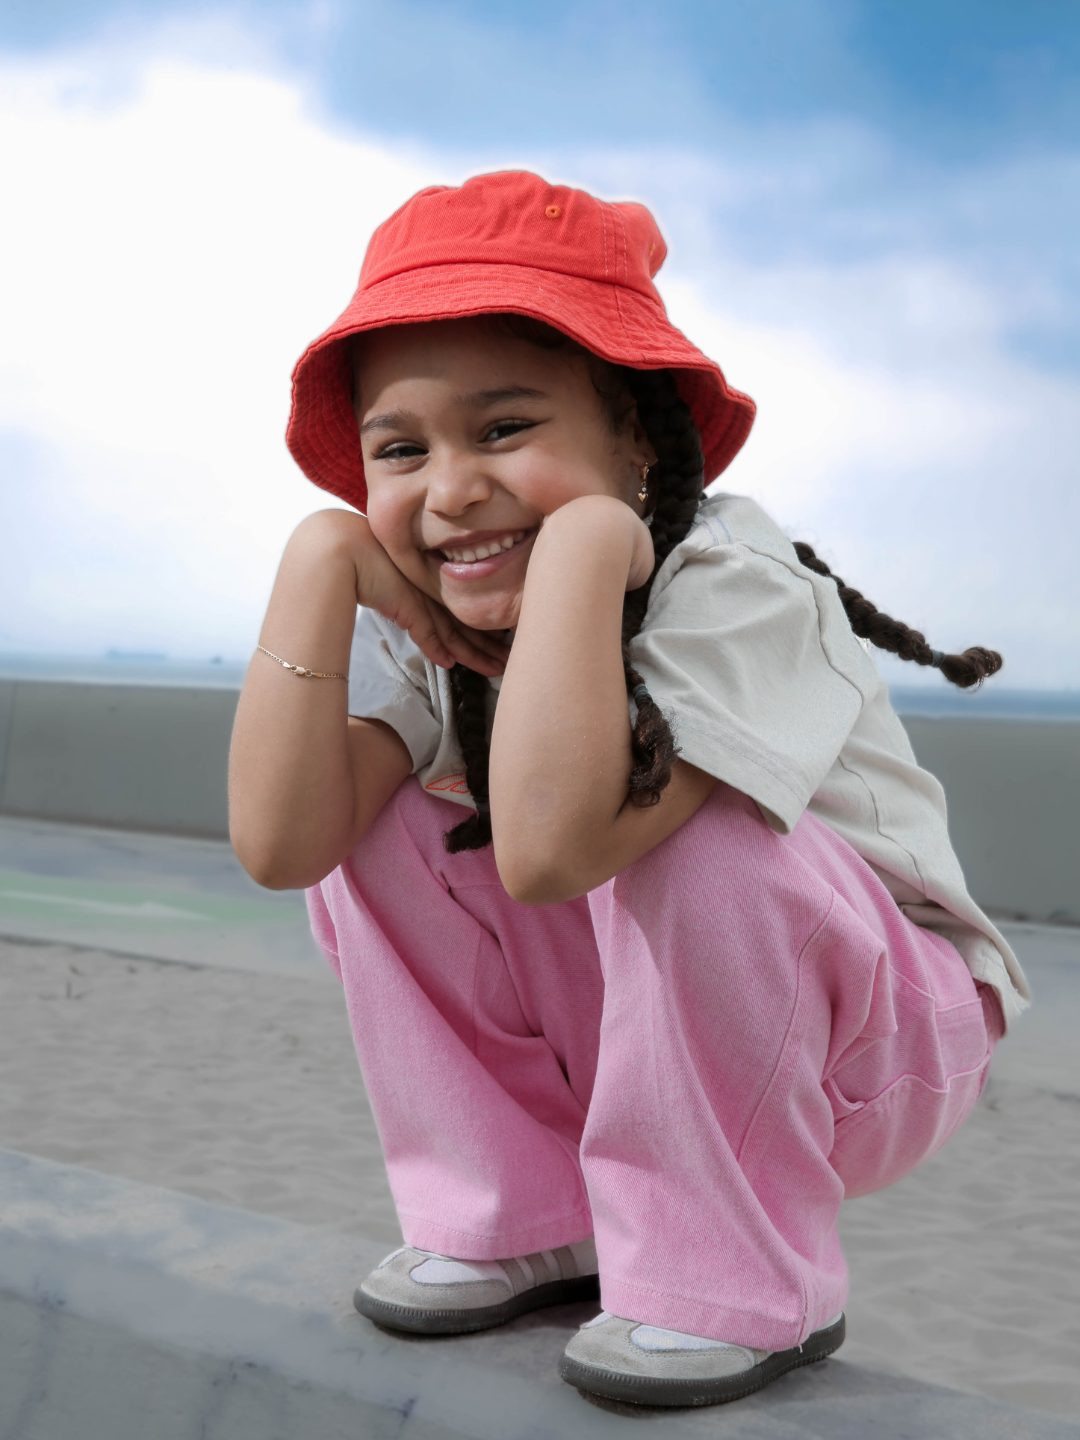 Orange | A smiling girl wearing the orange picnic bucket hat, with her hair in braids. She is squatting in pink jeans and an off-white t-shirt, and off-white sneakers, with blue sky behind her.